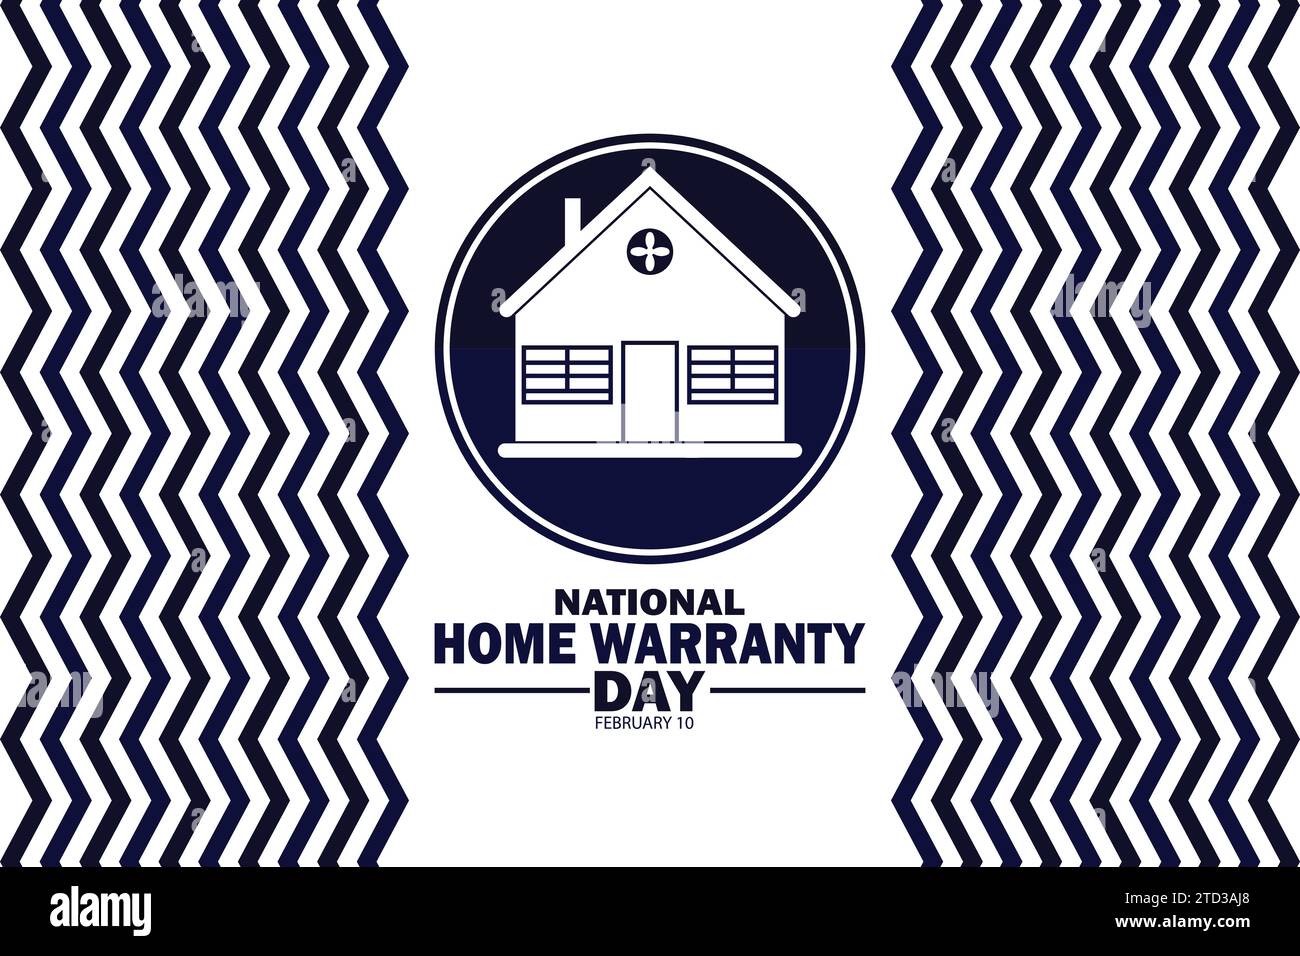 National Home Warranty Day Vector Template Design Illustration. February 10. Suitable for greeting card, poster and banner Stock Vector